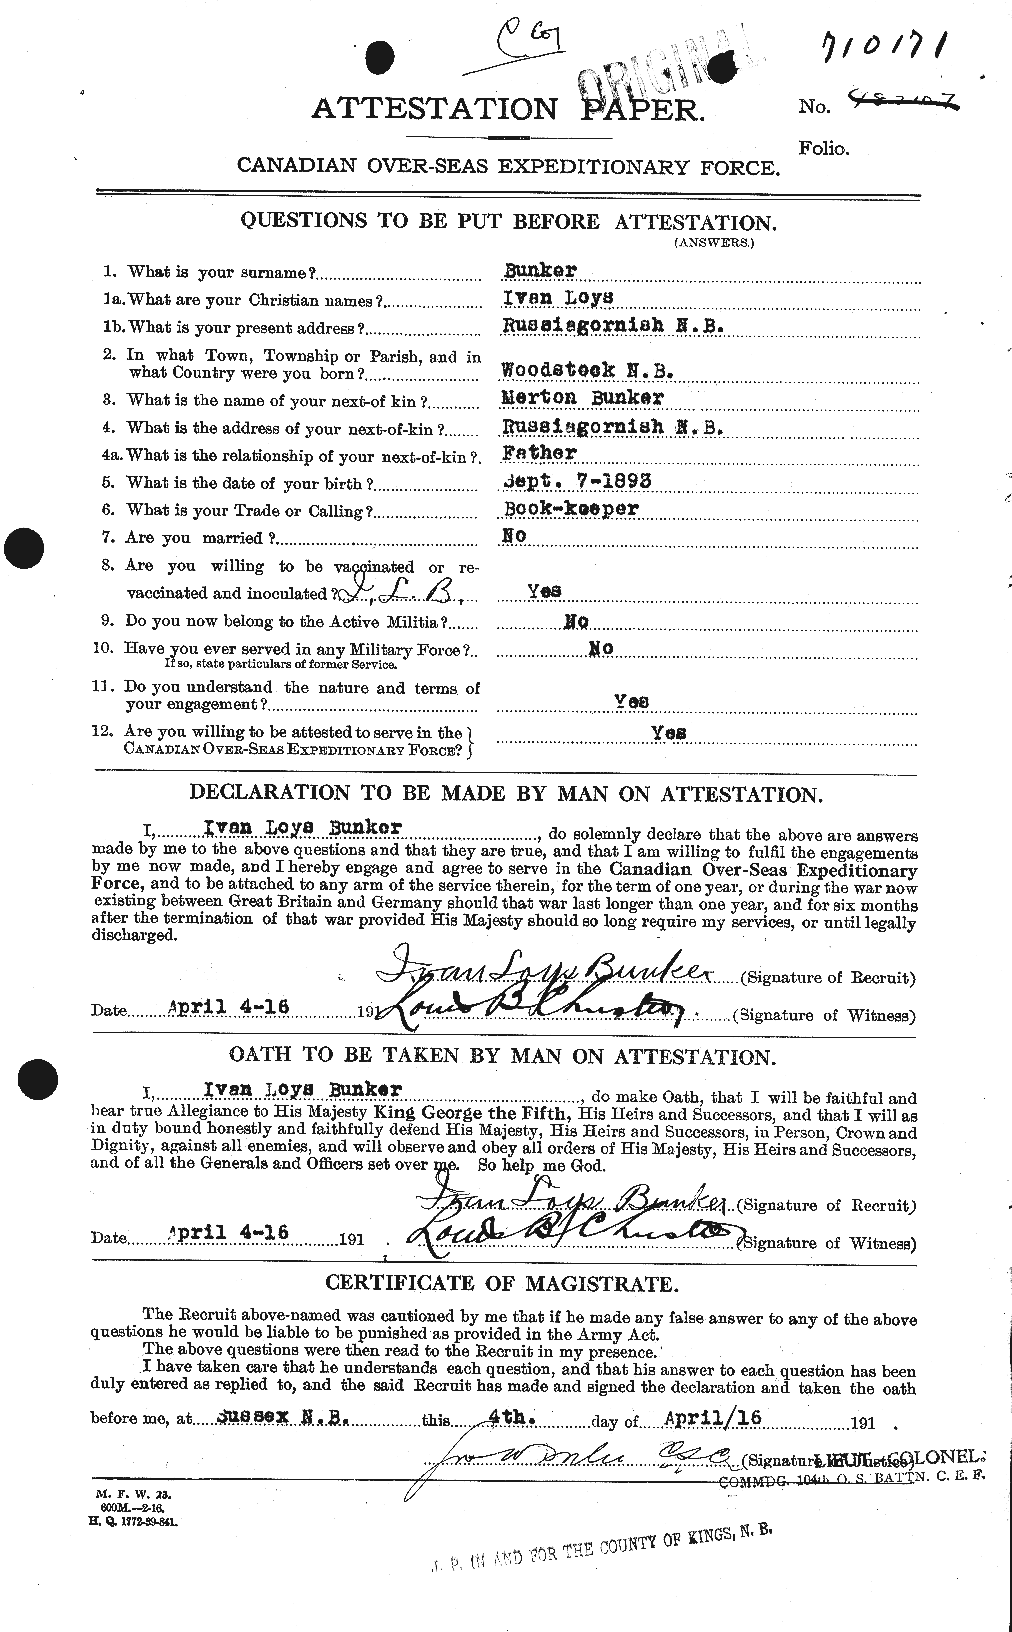 Personnel Records of the First World War - CEF 270401a